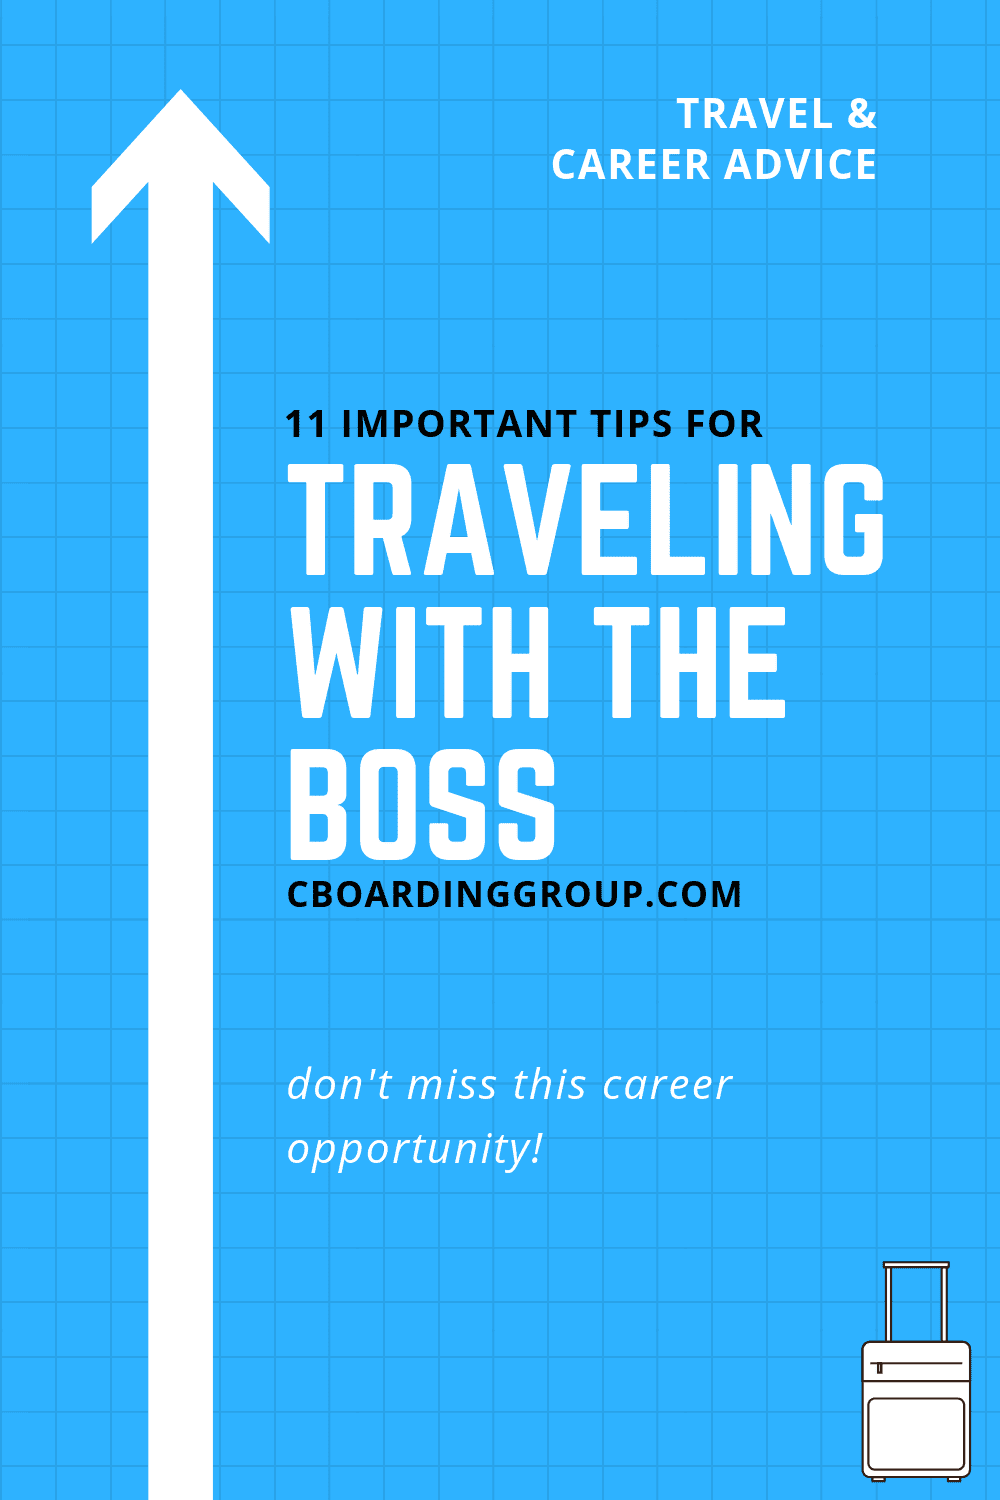 traveling with the boss - 11 important tips